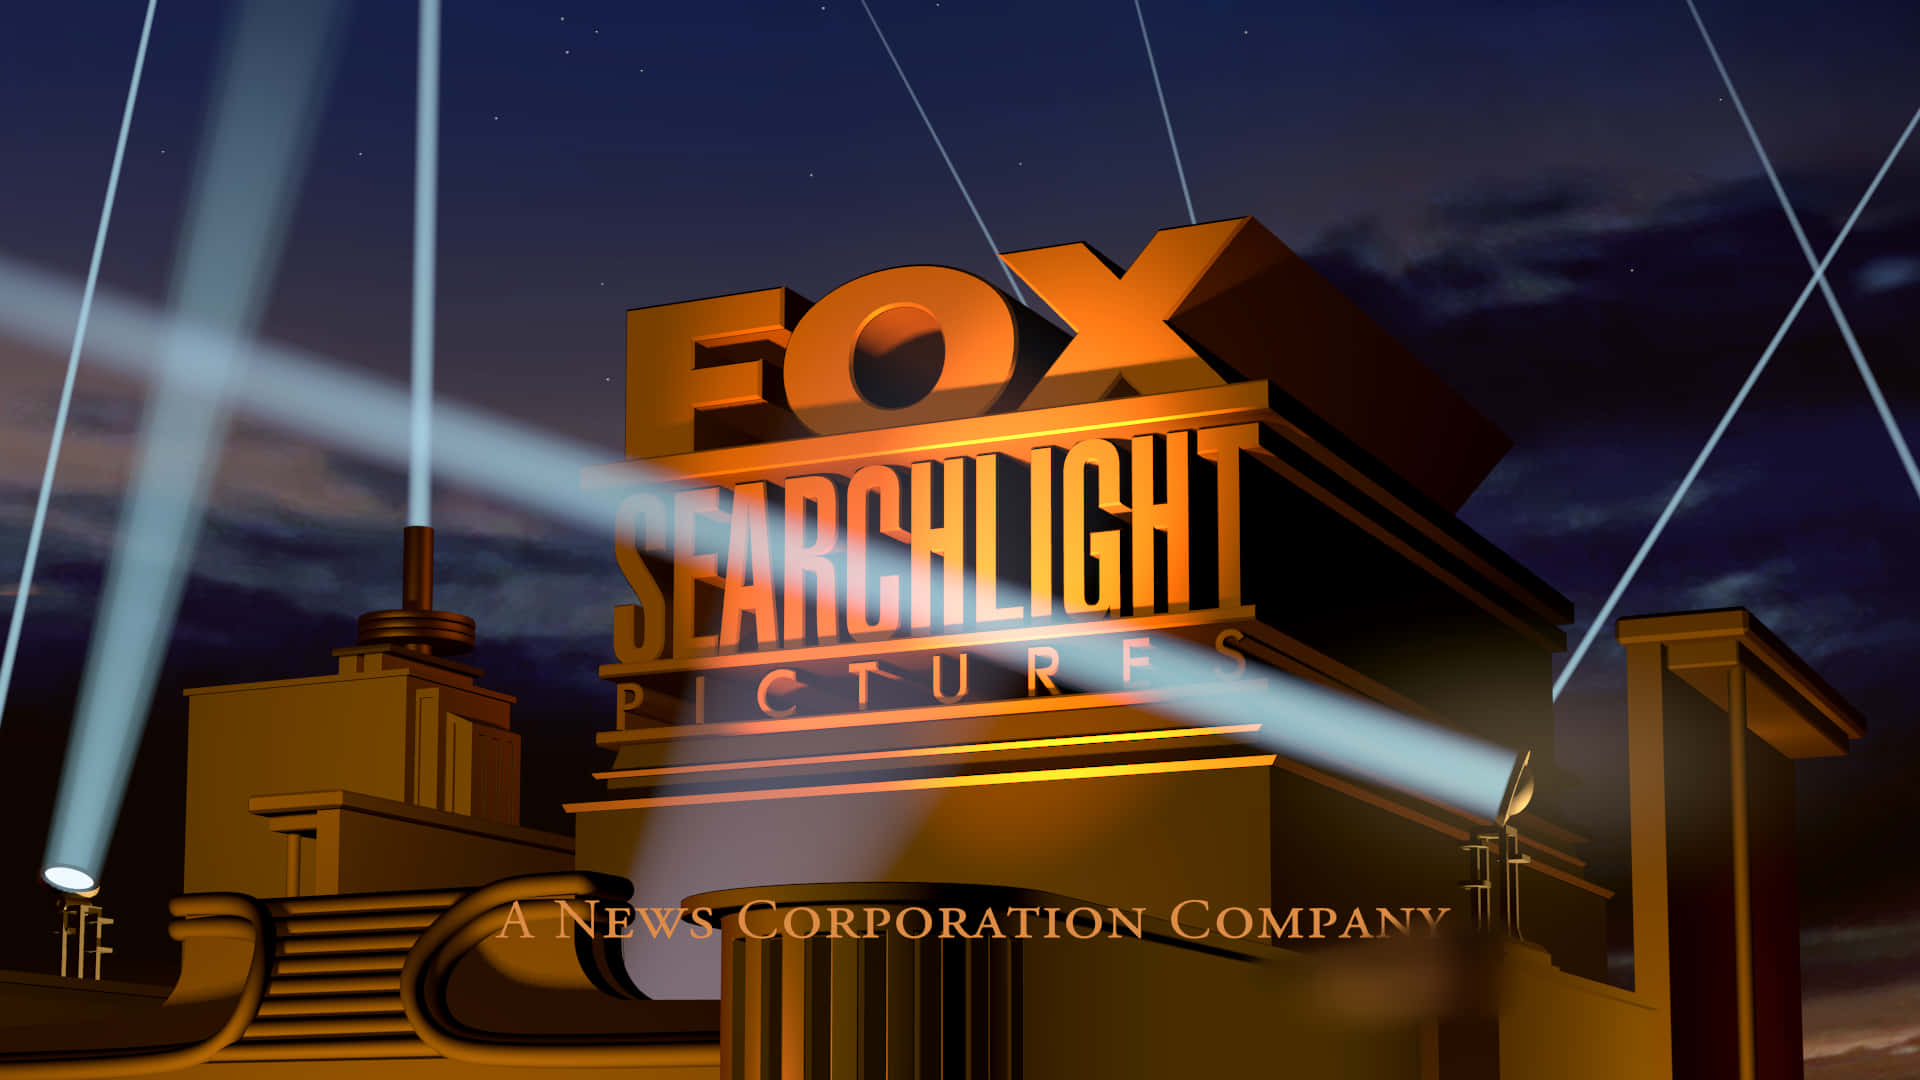 Iconic Searchlight Picture Logo